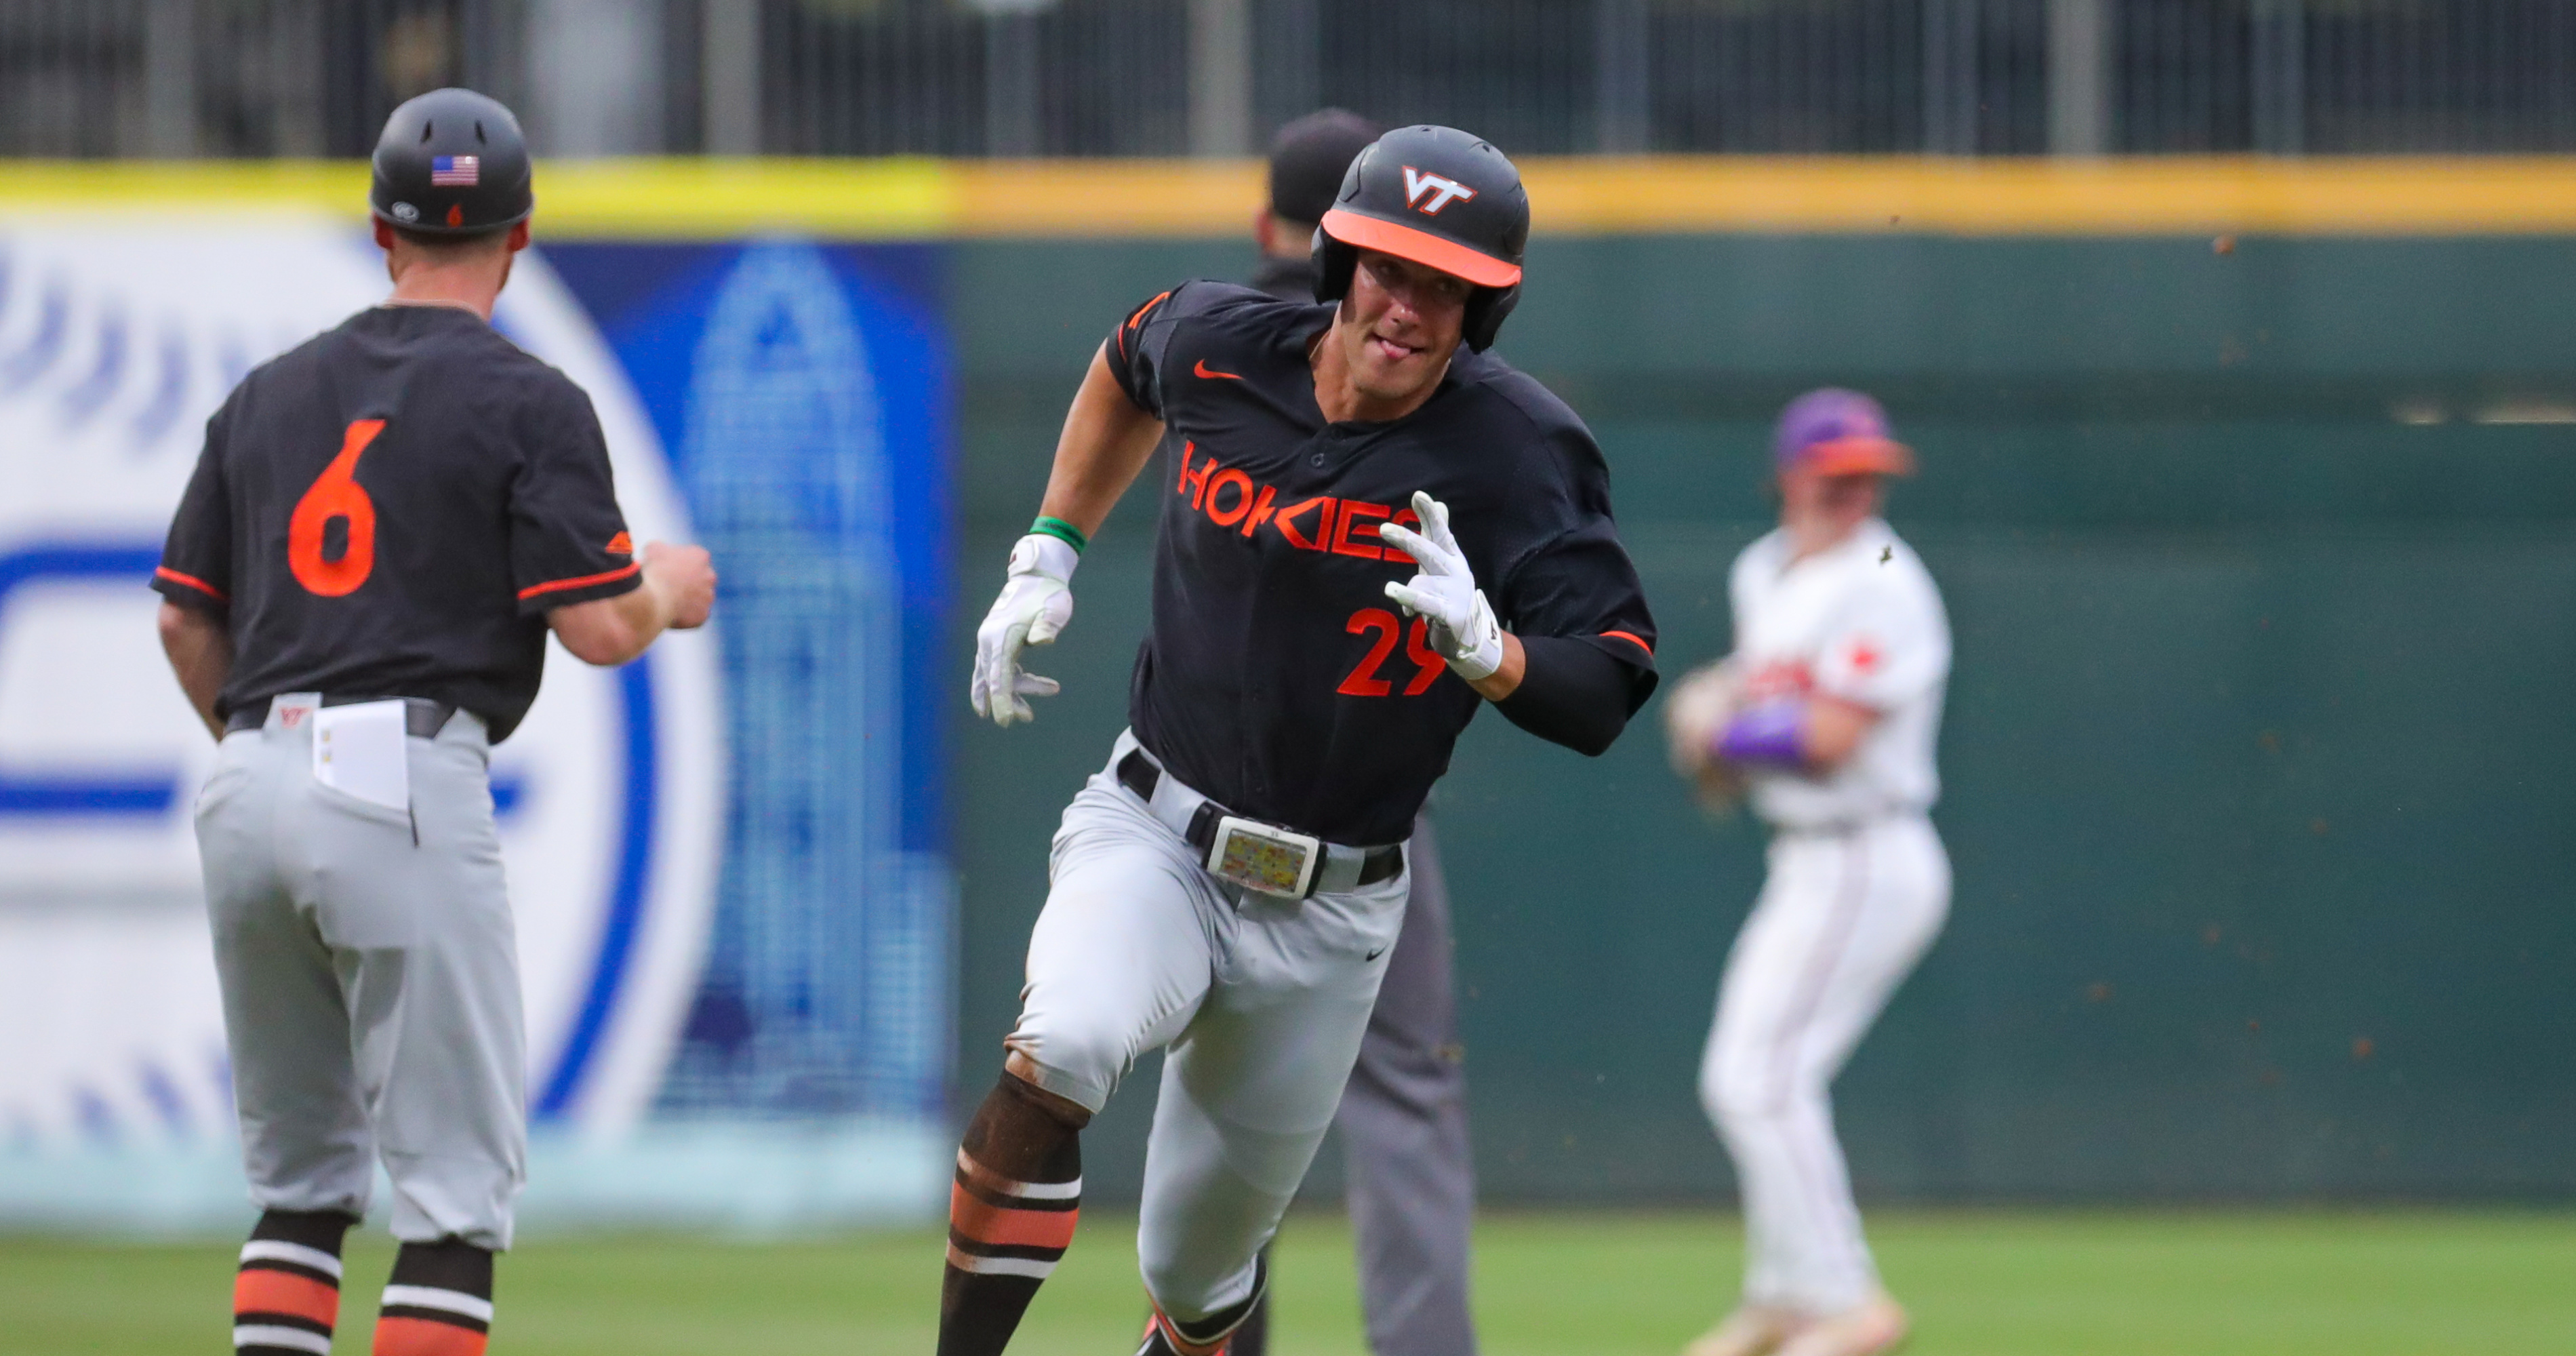 ACC Baseball Tournament 2022 Friday Scores, Updated Bracket and